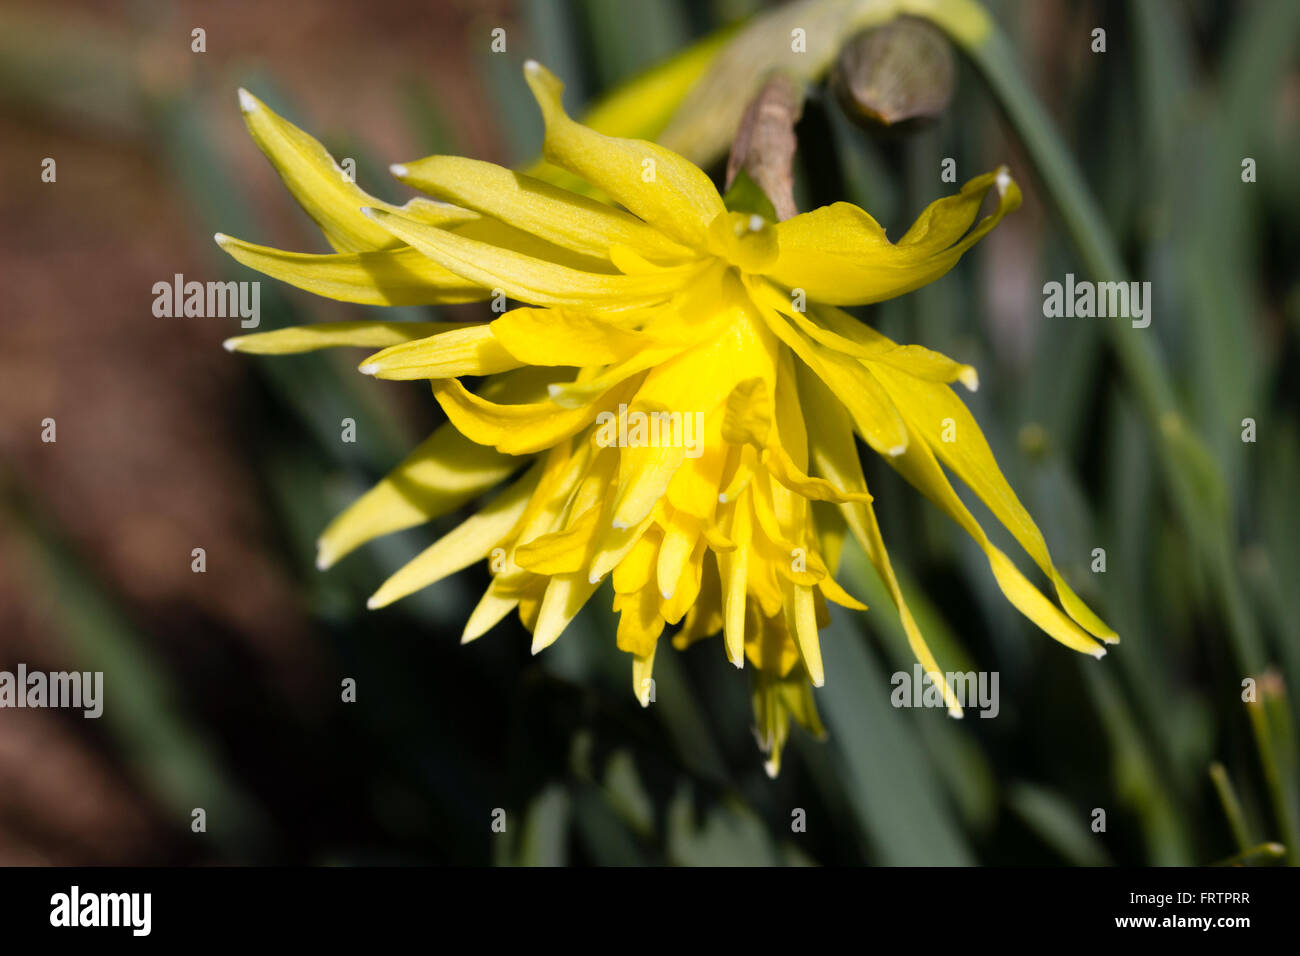 Double flower of the small, March flowering daffodil, Narcissus 'Rip van Winkle' Stock Photo